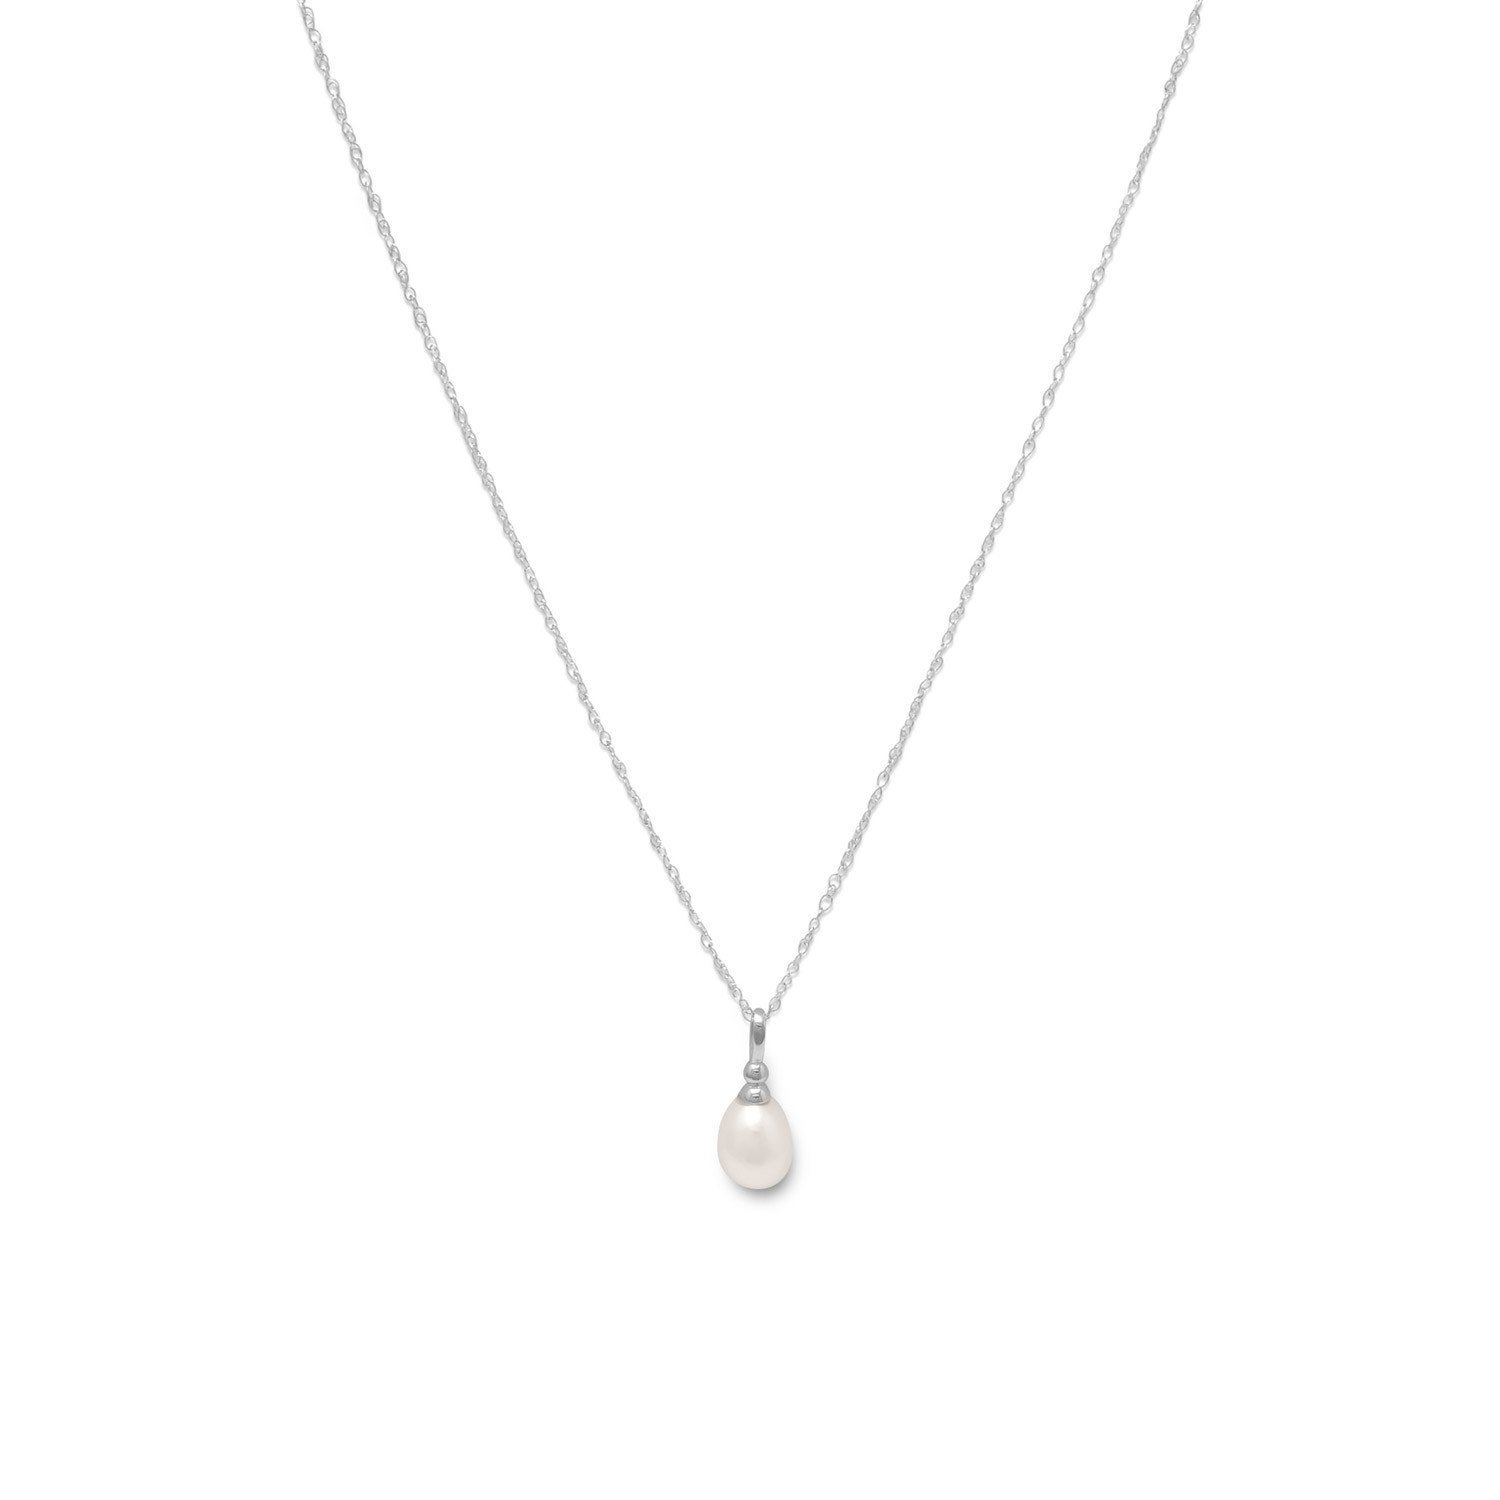 18" Rhodium Plated Cultured Freshwater Pearl Drop Necklace